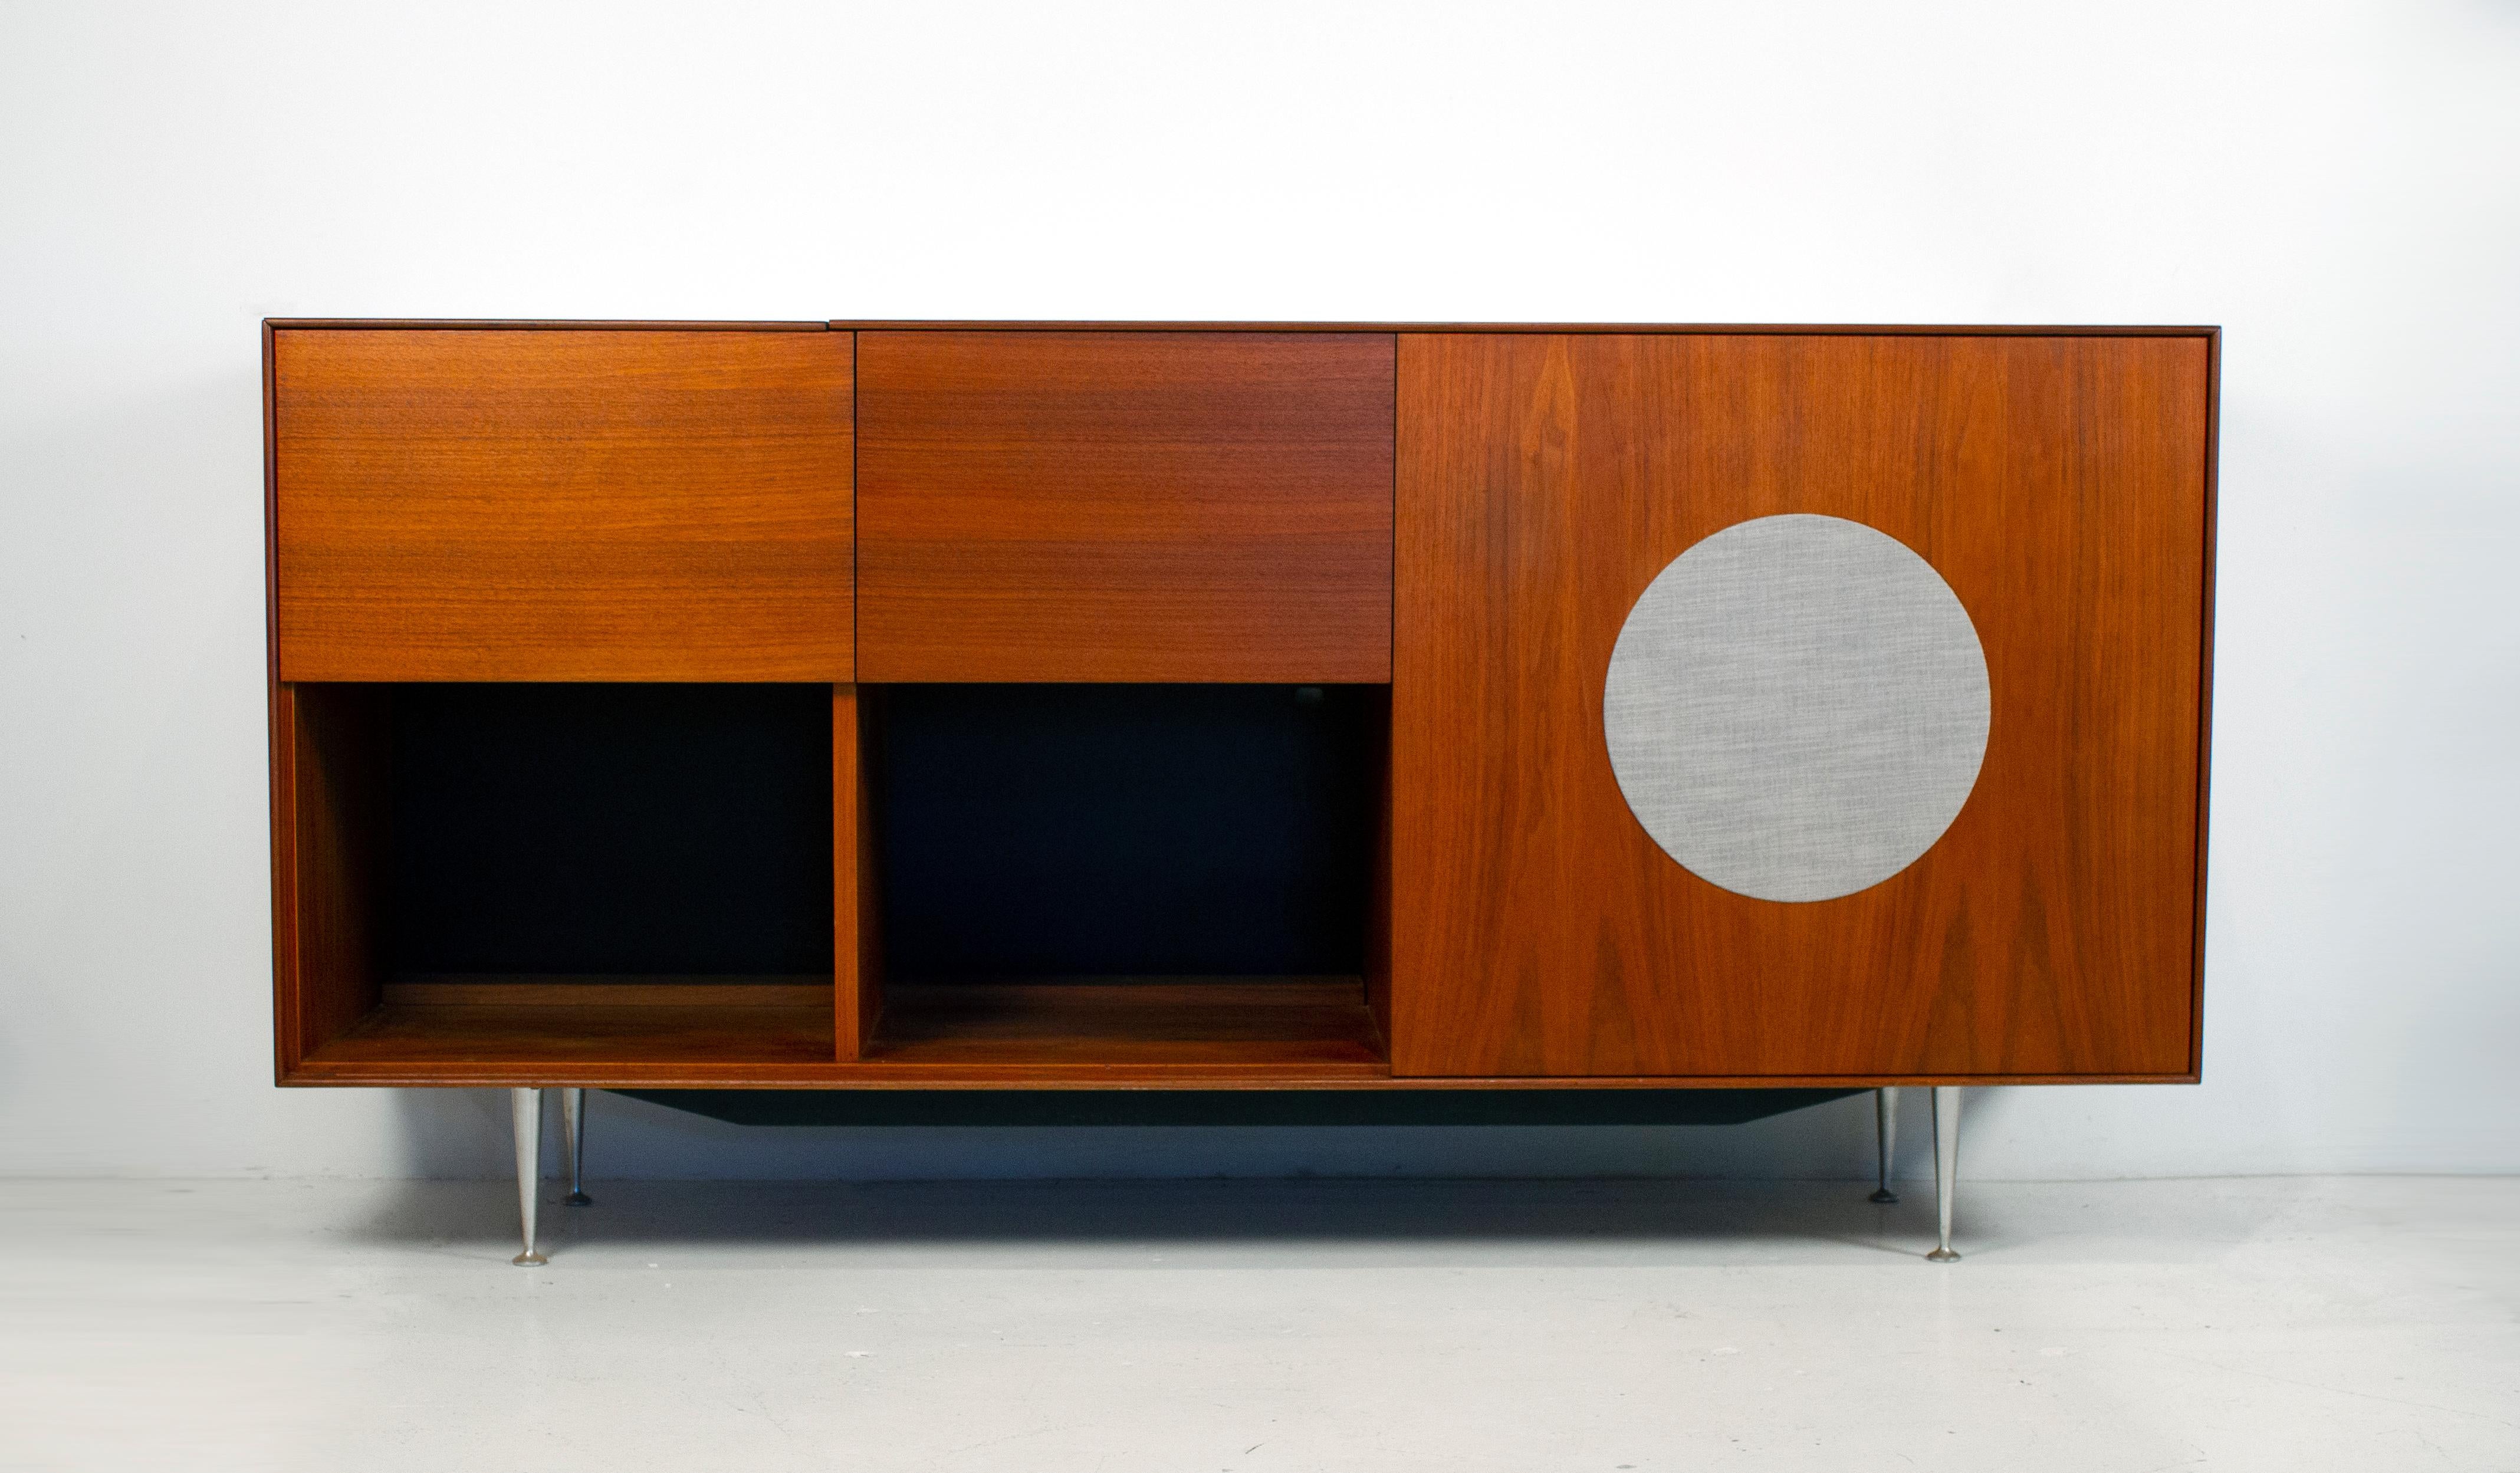 This Herman Miller cabinet was created in 1952. It is from the desirable thin-edge series and has a space for a single speaker, a flip open top for a turntable and a drop down compartment for your amplifier and receiver. It is in very good condition